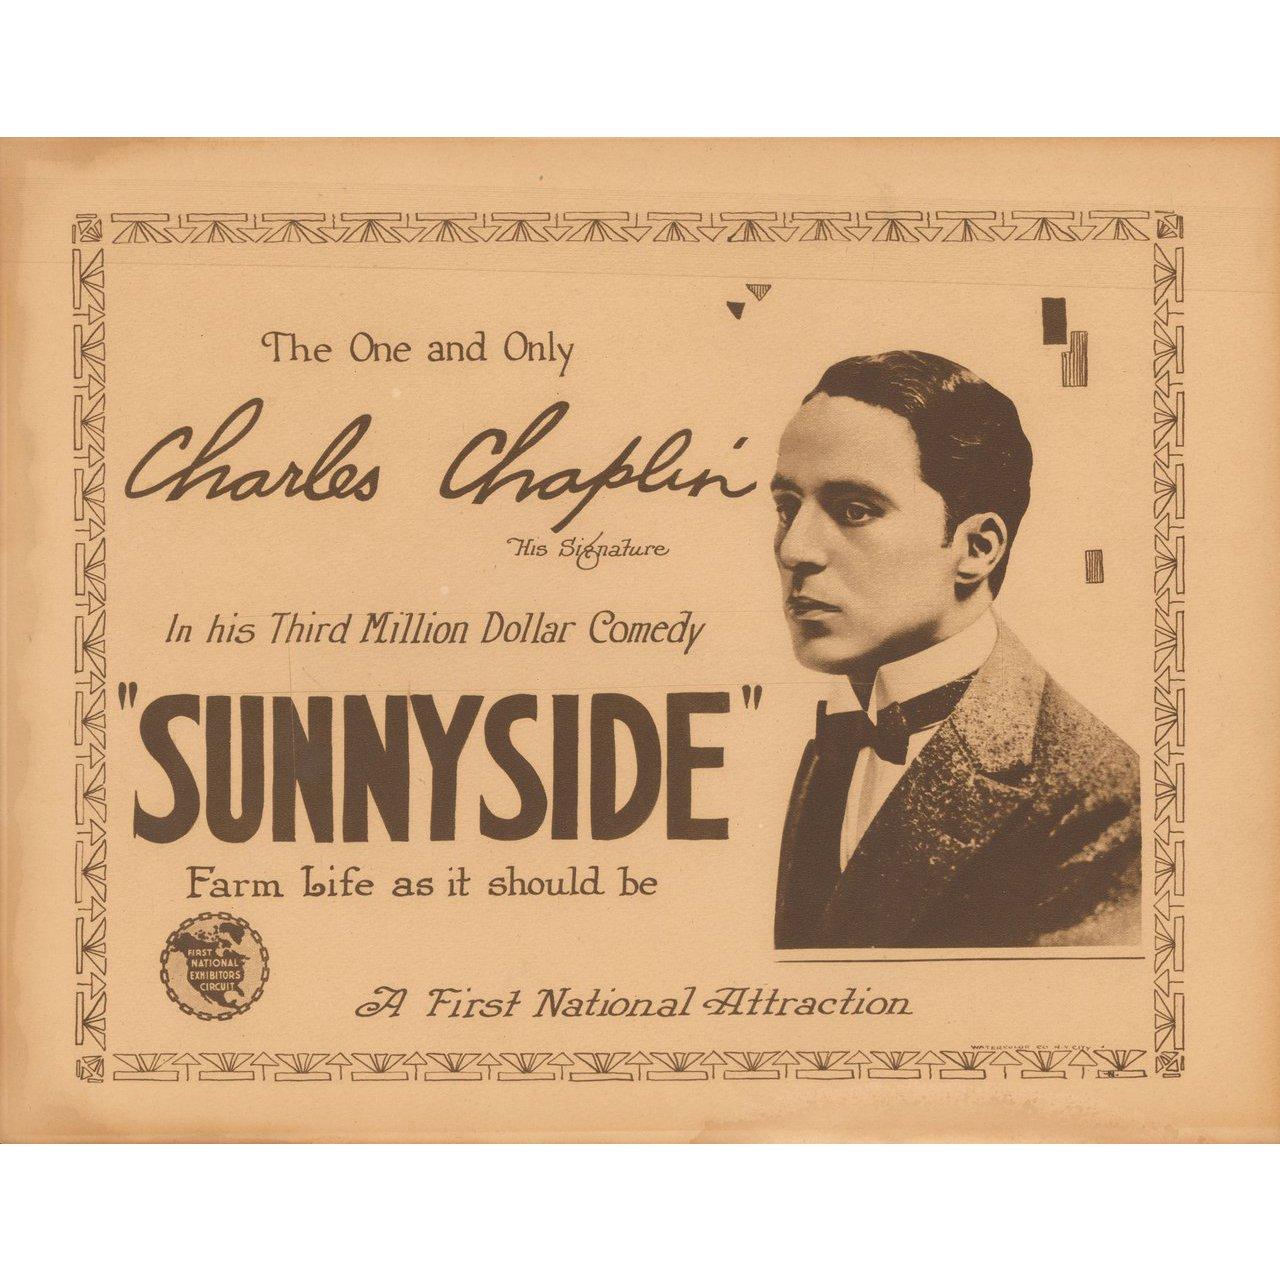 Original 1919 U.S. title card for the film Sunnyside directed by Charles Chaplin with Charles Chaplin / Edna Purviance. Very Good-Fine condition. Please note: the size is stated in inches and the actual size can vary by an inch or more.